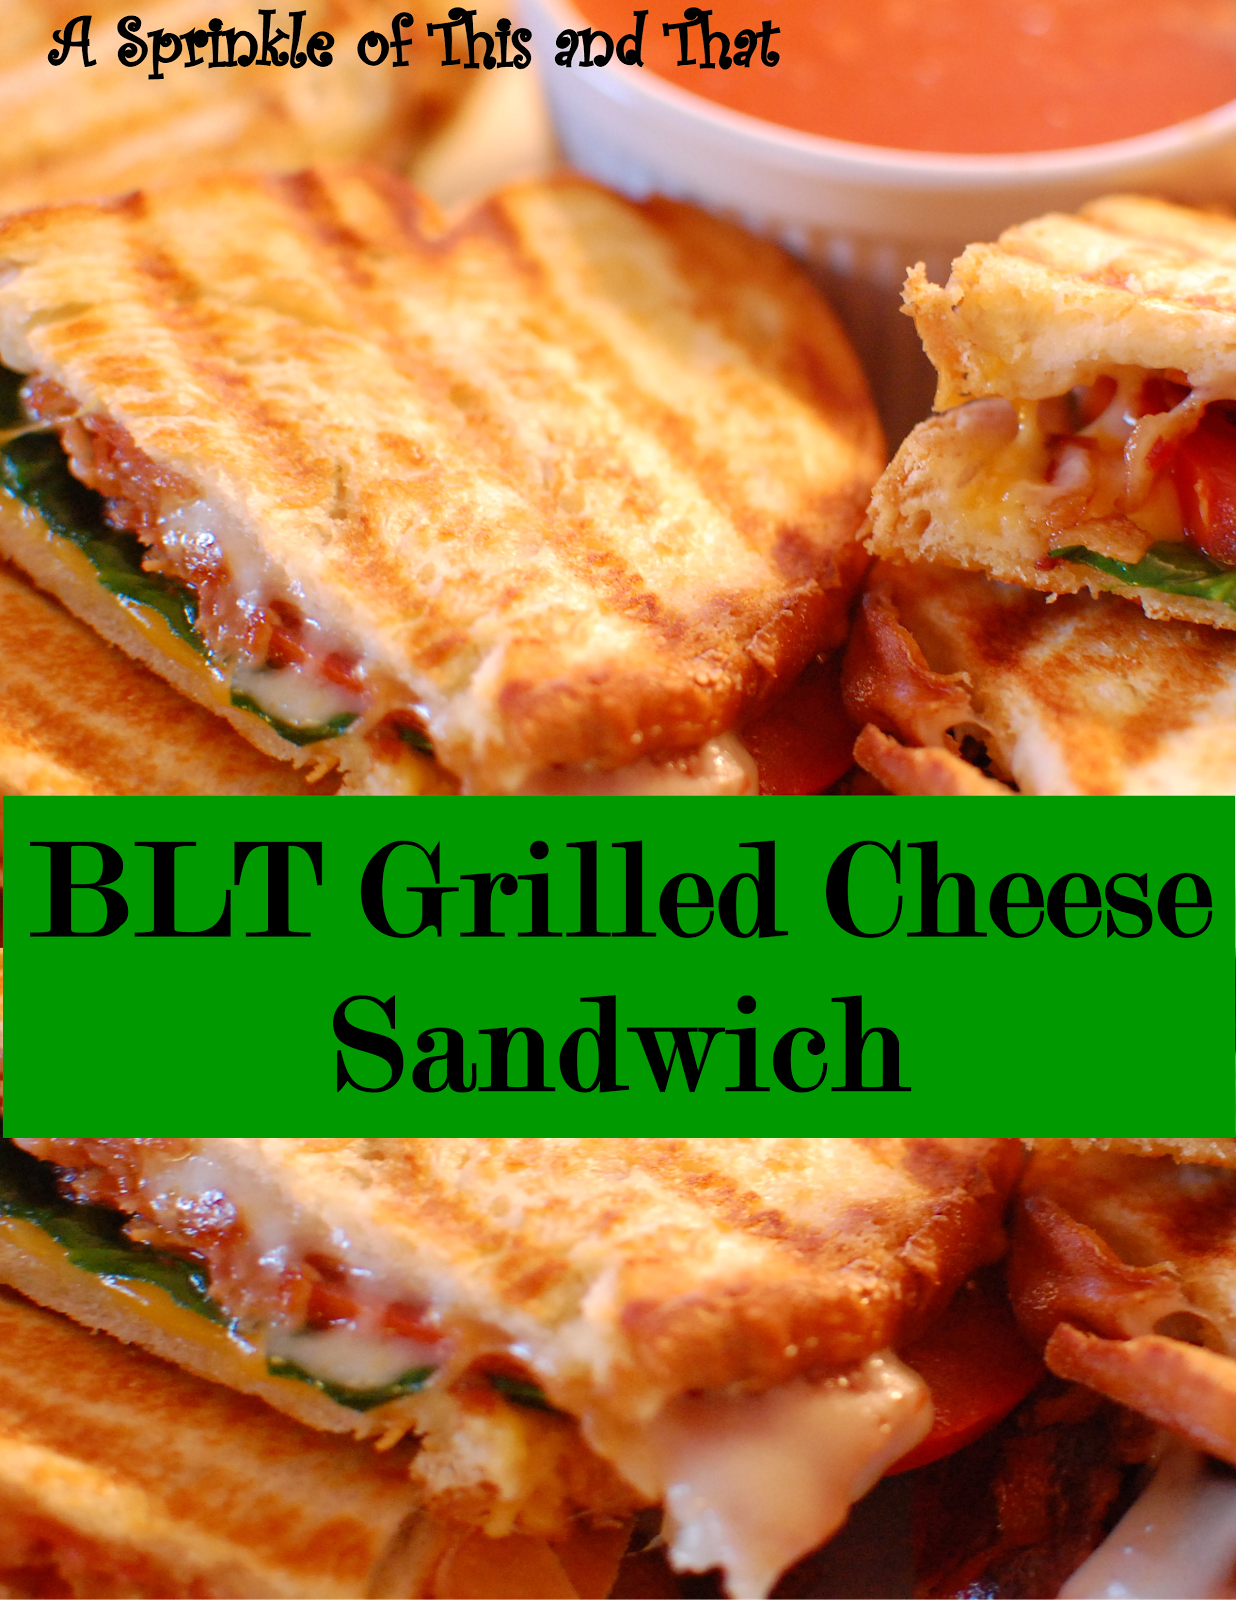 A Sprinkle of This and That: BLT Grilled Cheese Sandwich